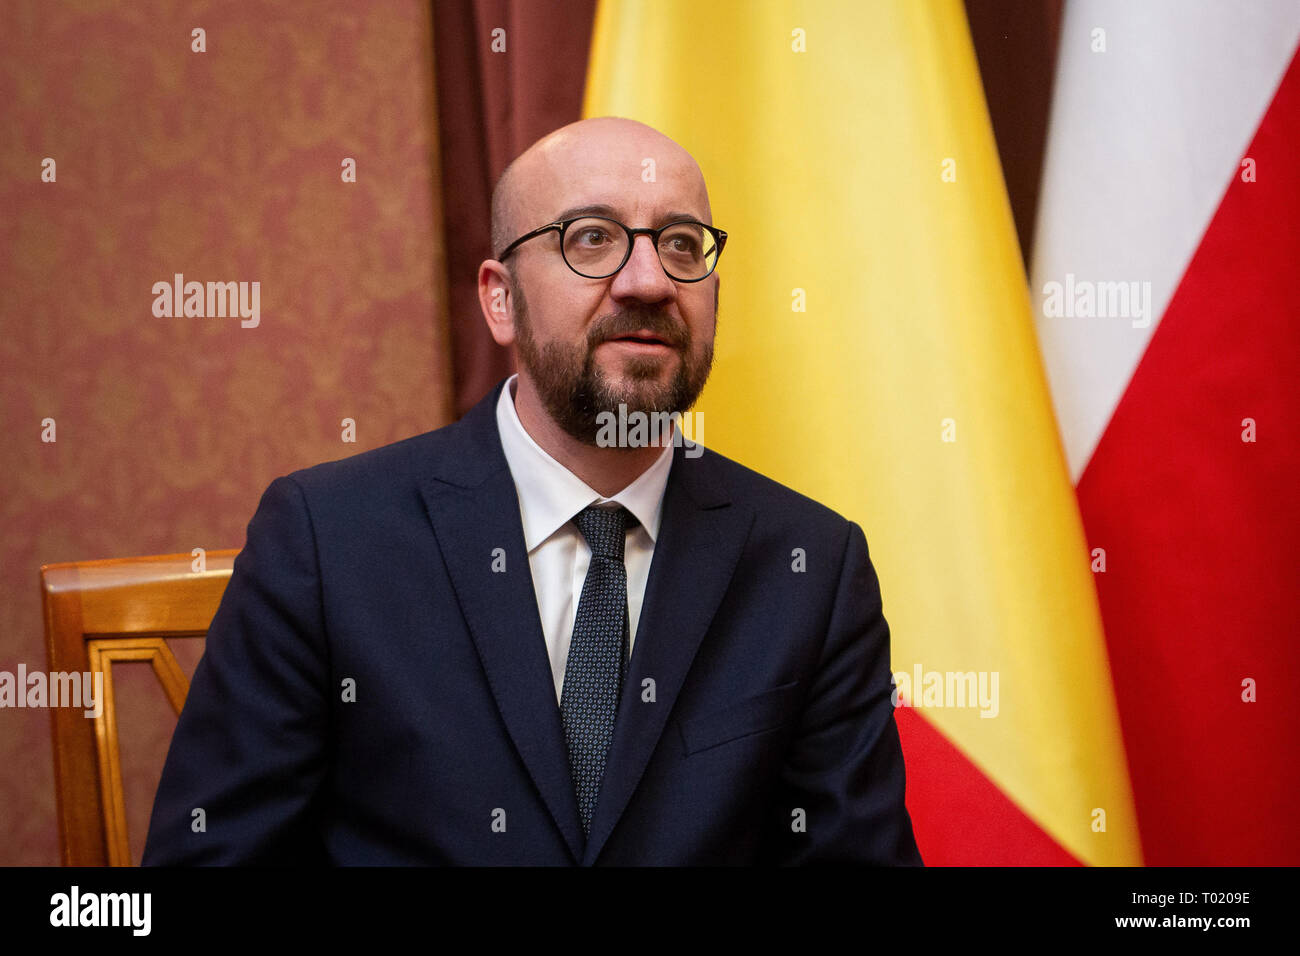 Prime Minister of Belgium Charles Michel during the meeting with Prime Minister of Poland Mateusz Morawiecki in Warsaw, Poland on 12 March 2019 Stock Photo